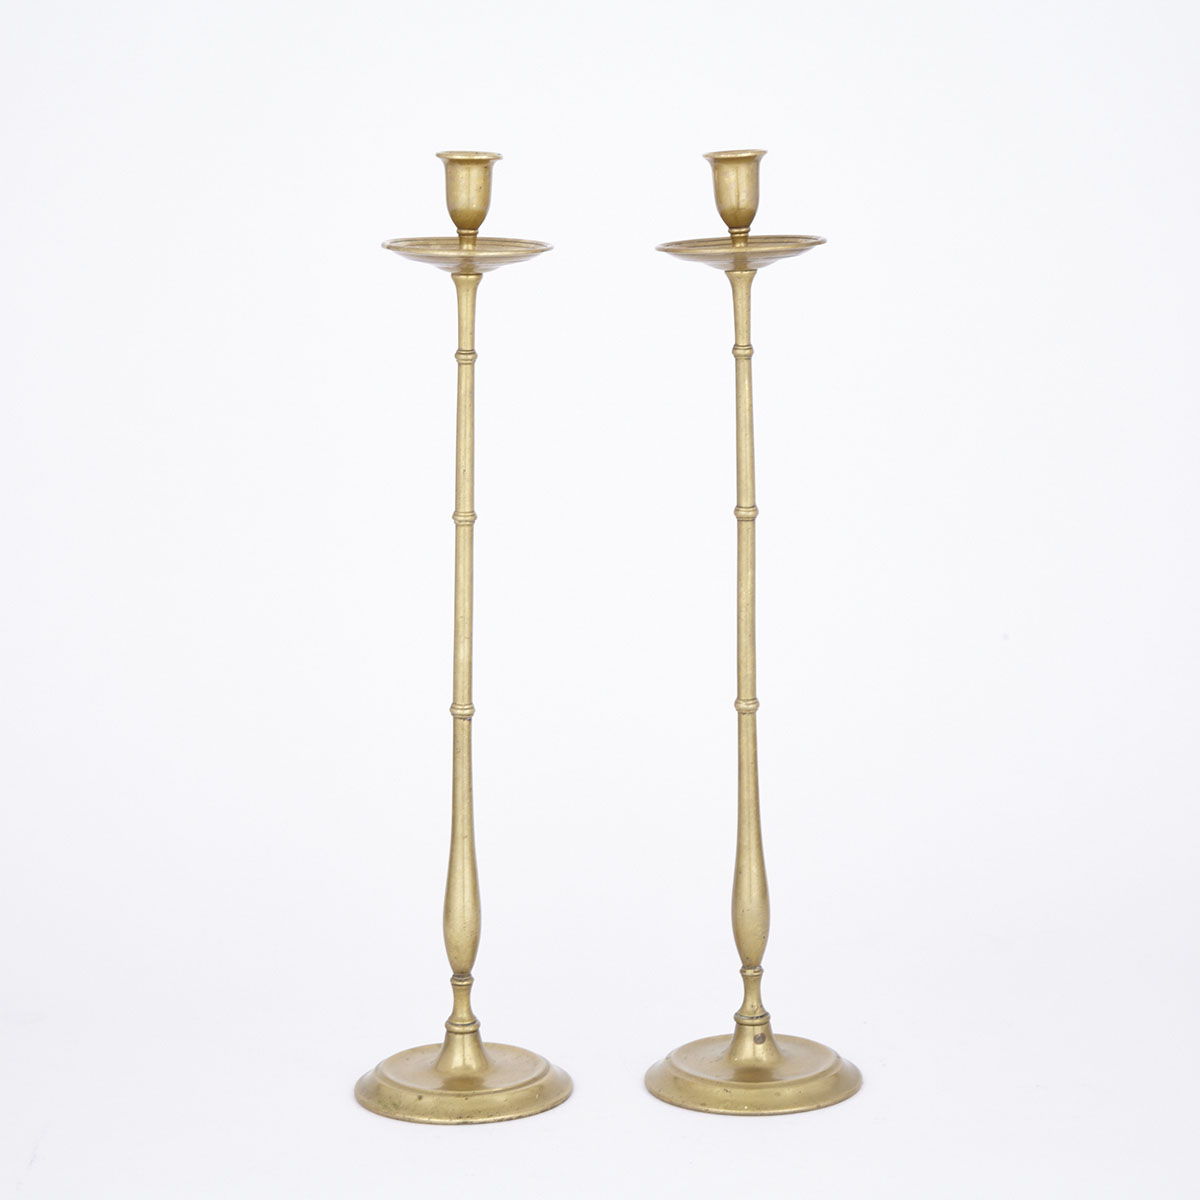 Pair of Tall Slender Turned Brass Candlesticks, early-mid 20th century